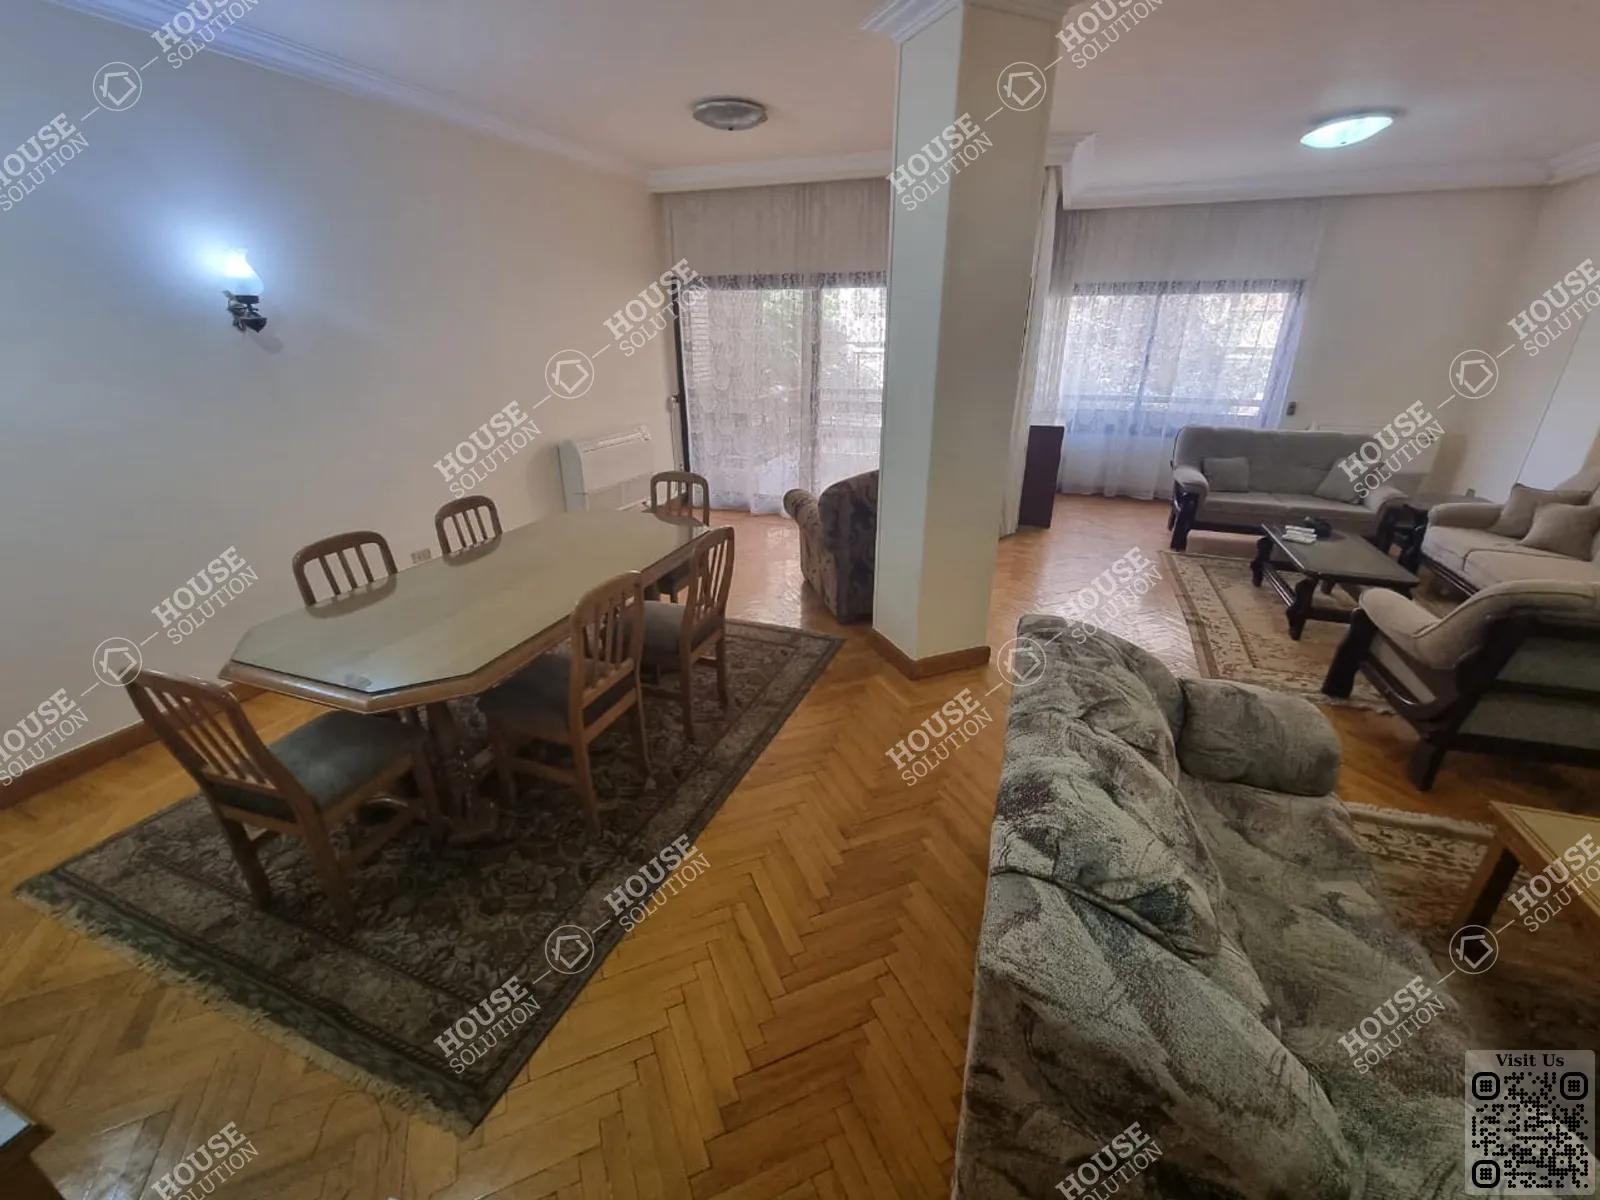 DINING AREA @ Apartments For Rent In Maadi Maadi Degla Area: 200 m² consists of 3 Bedrooms 3 Bathrooms Furnished 5 stars #5521-2